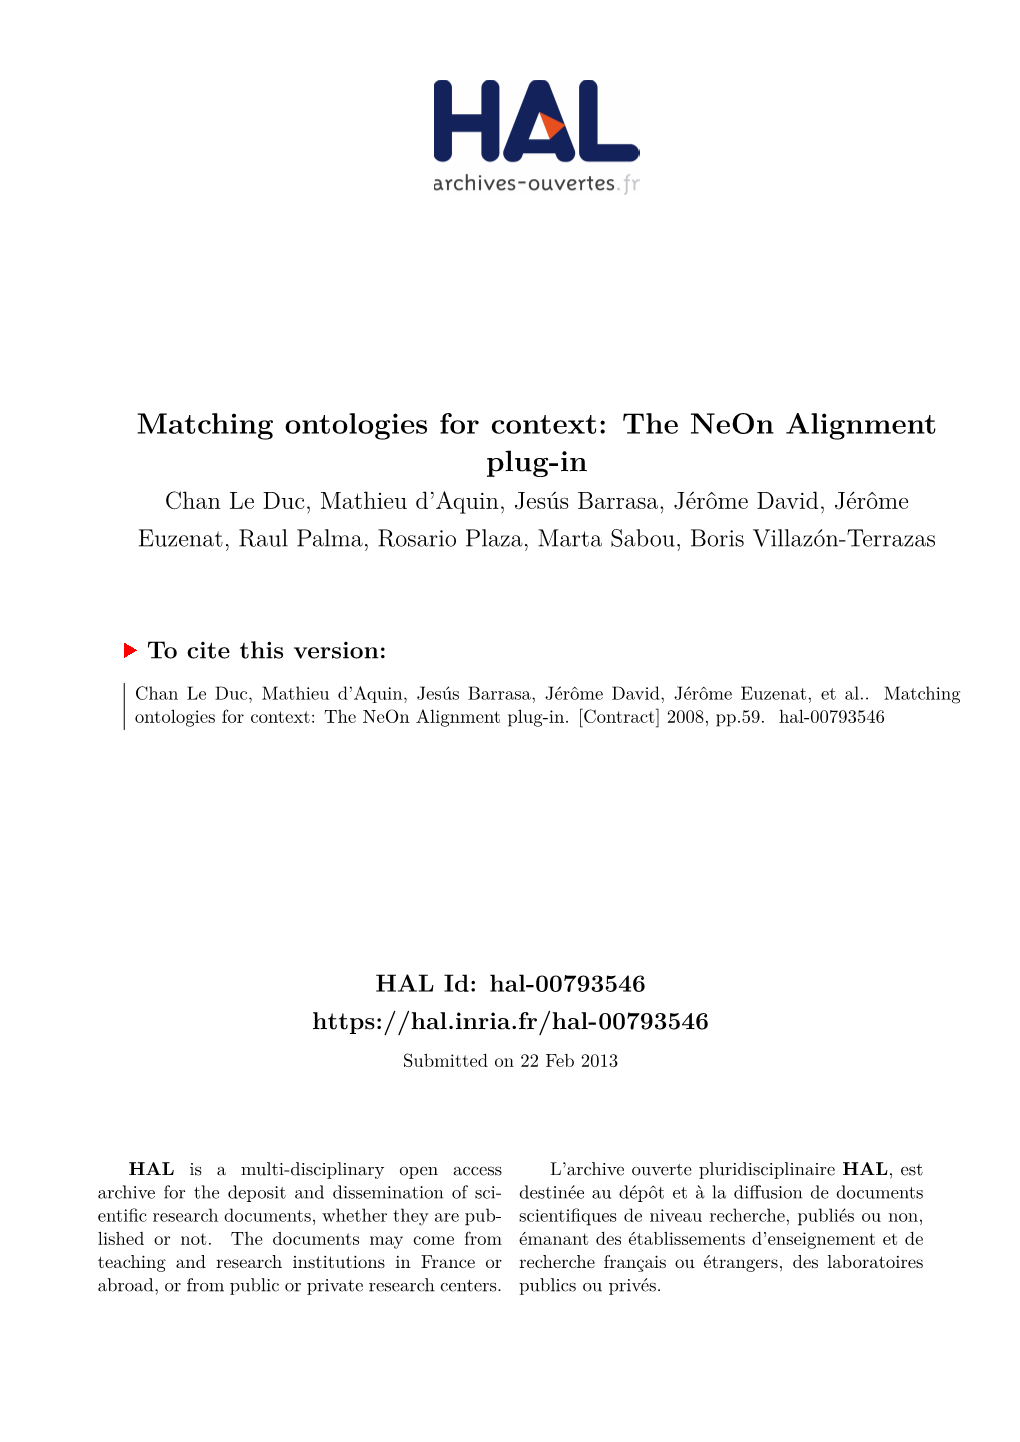 Matching Ontologies for Context: the Neon Alignment Plug-In